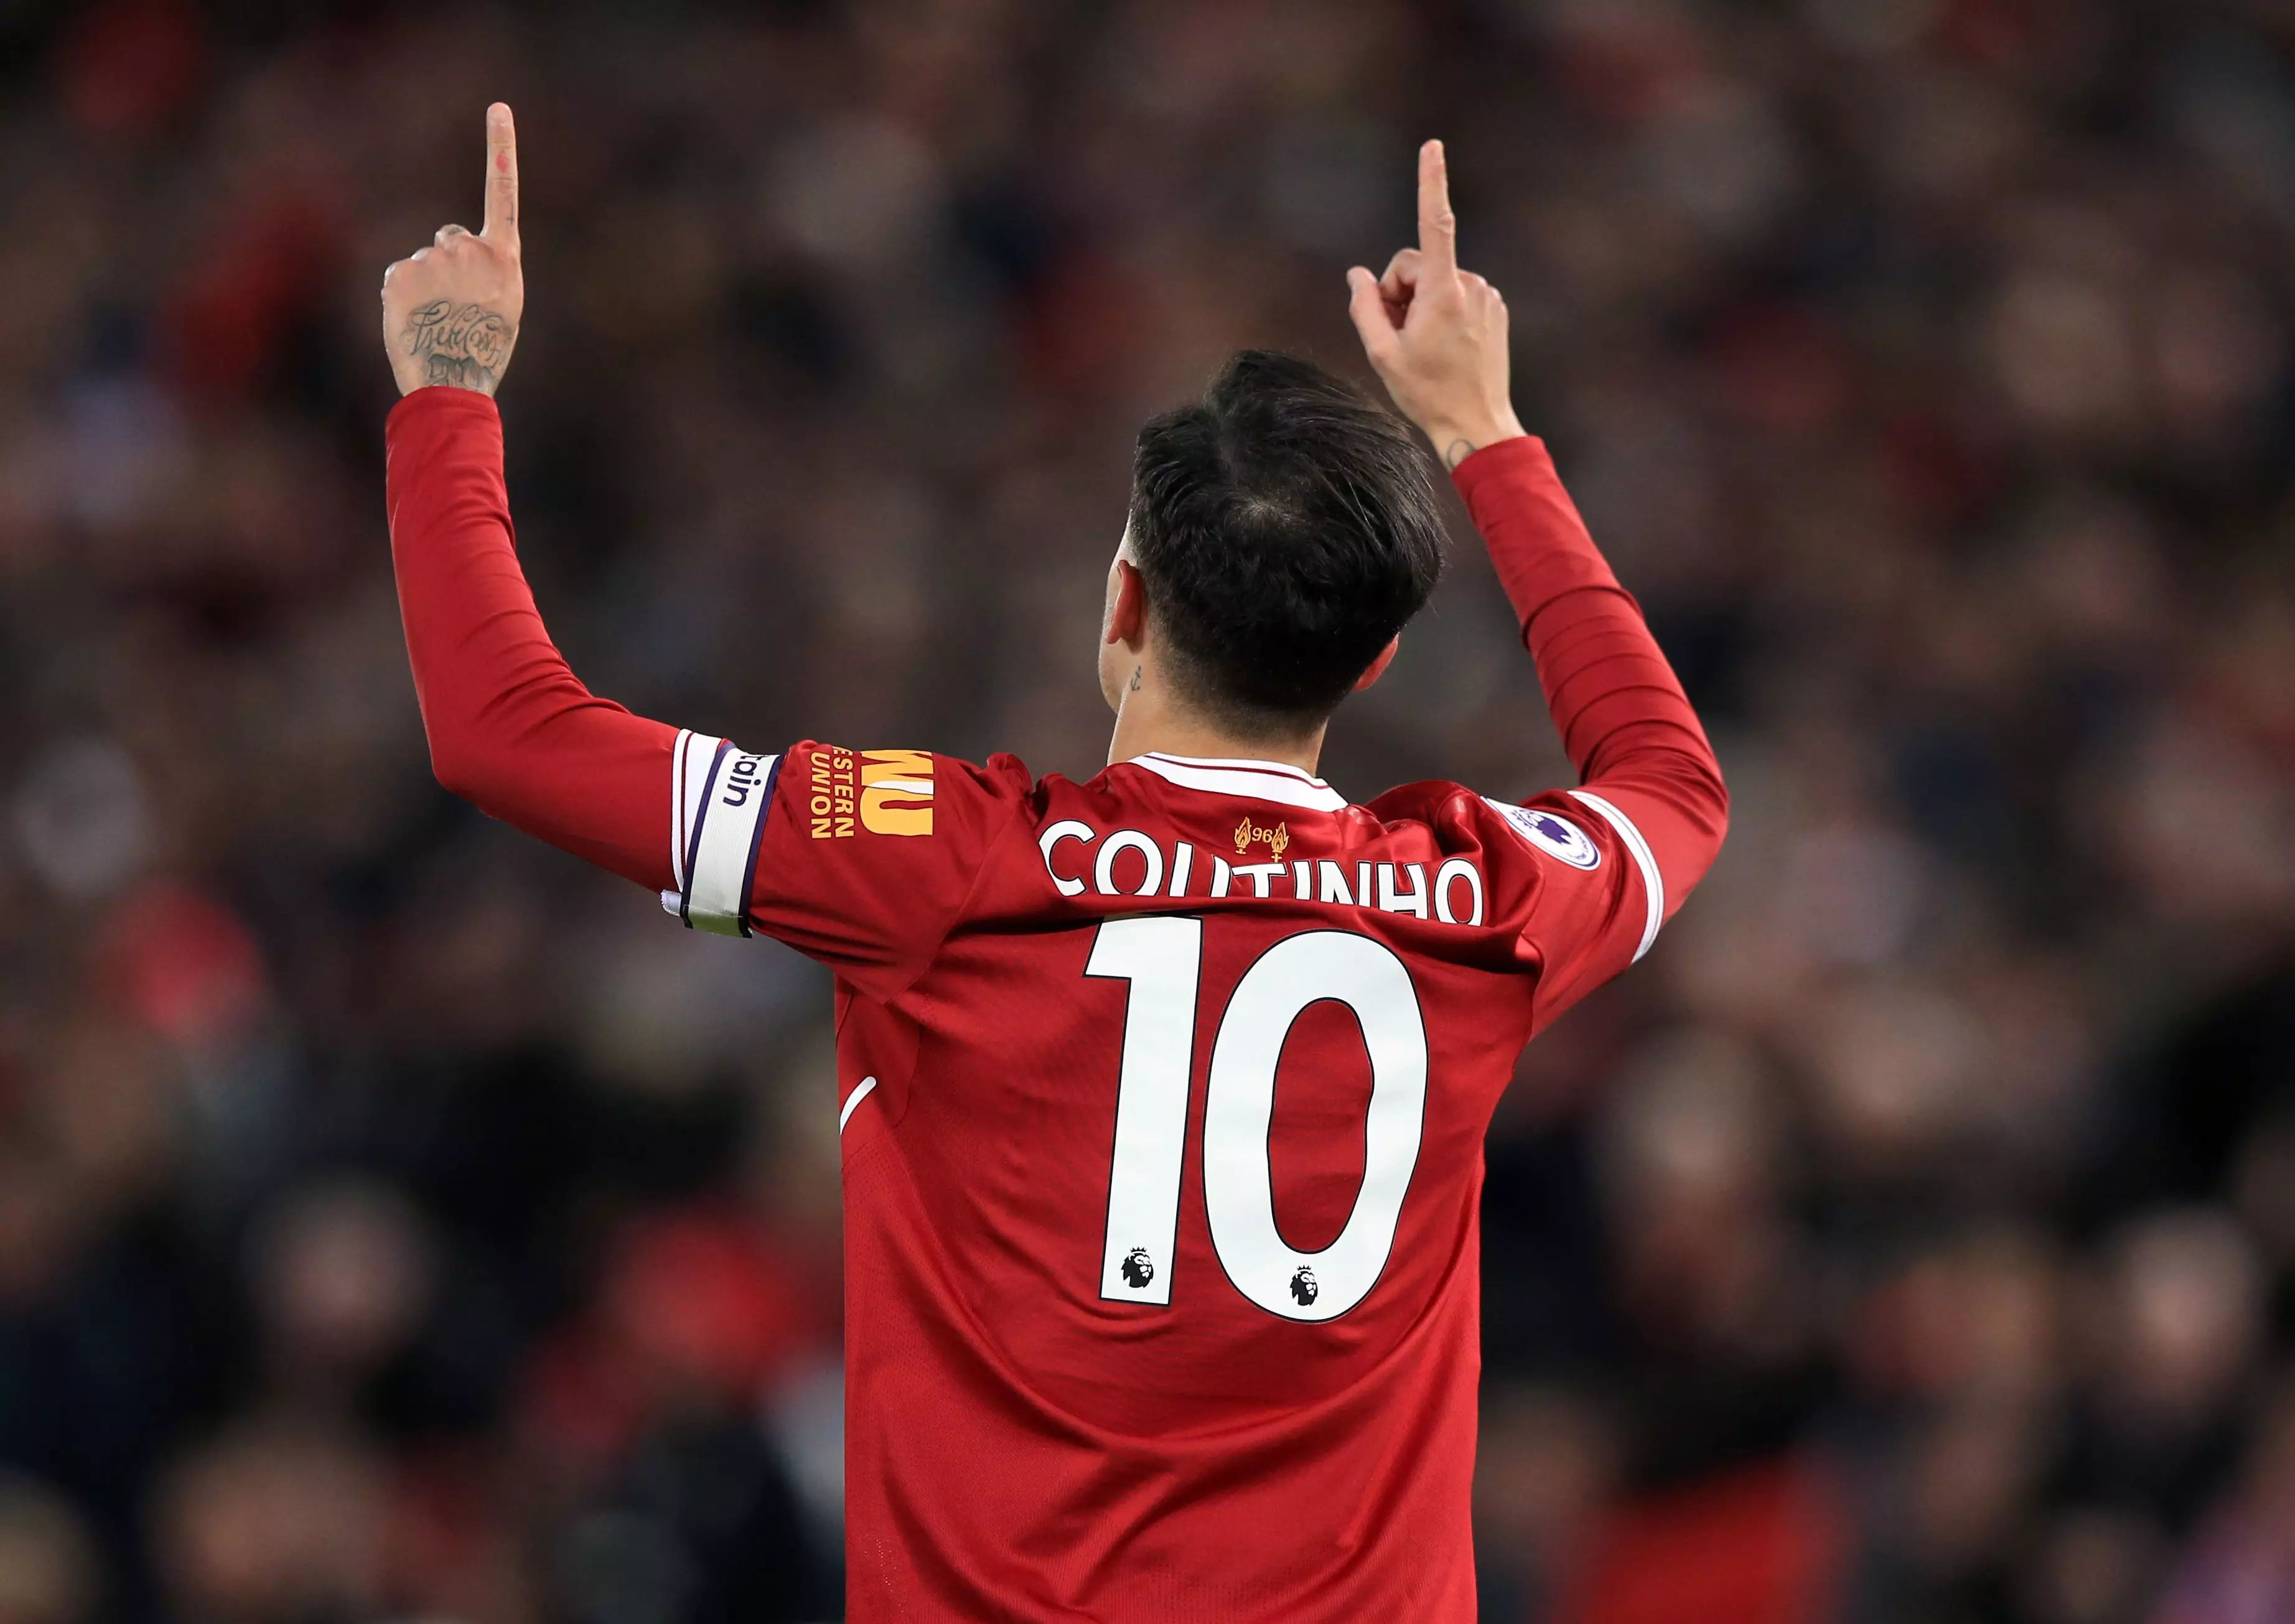 Coutinho has continued to play well this season despite wanting to leave. Image: PA Images.